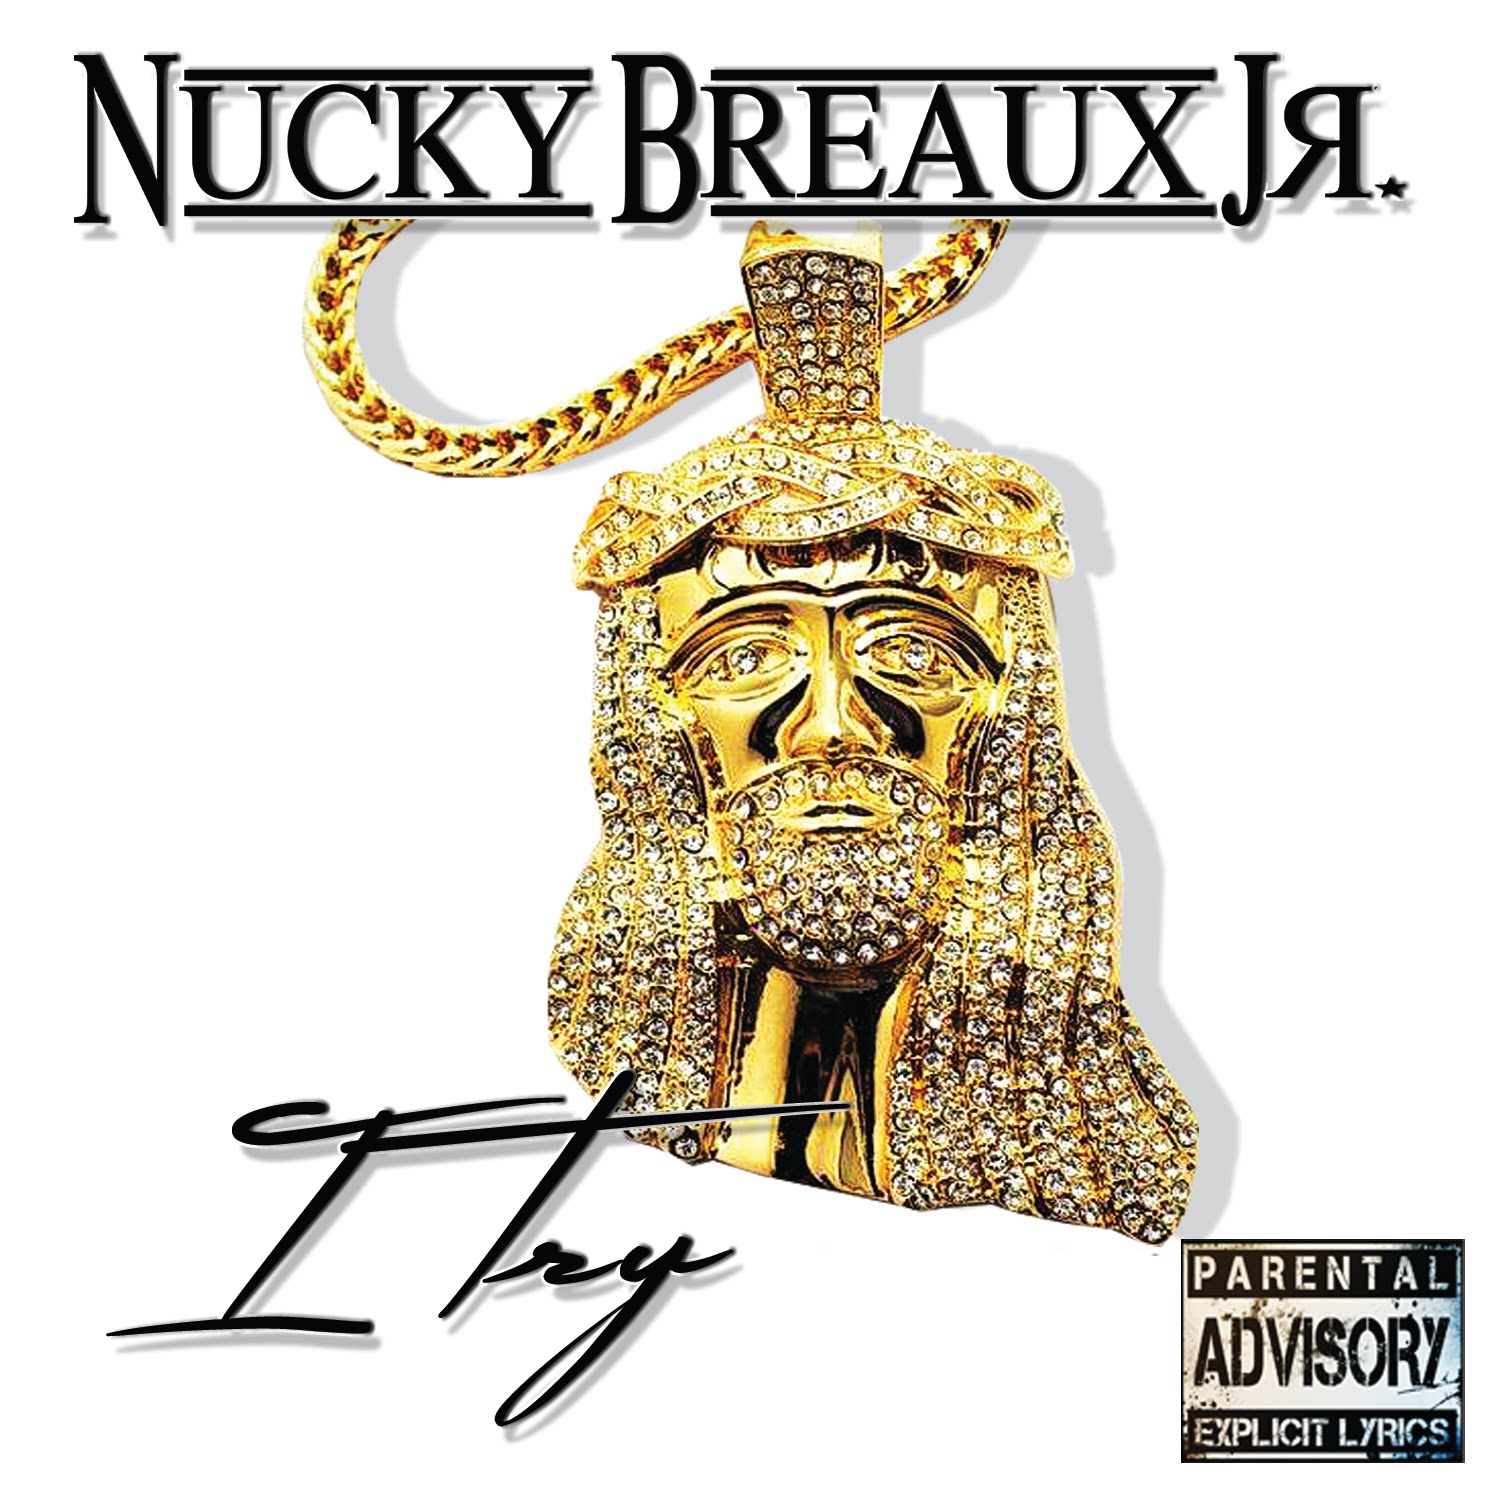 I Try new song from Nucky Breaux Jr.